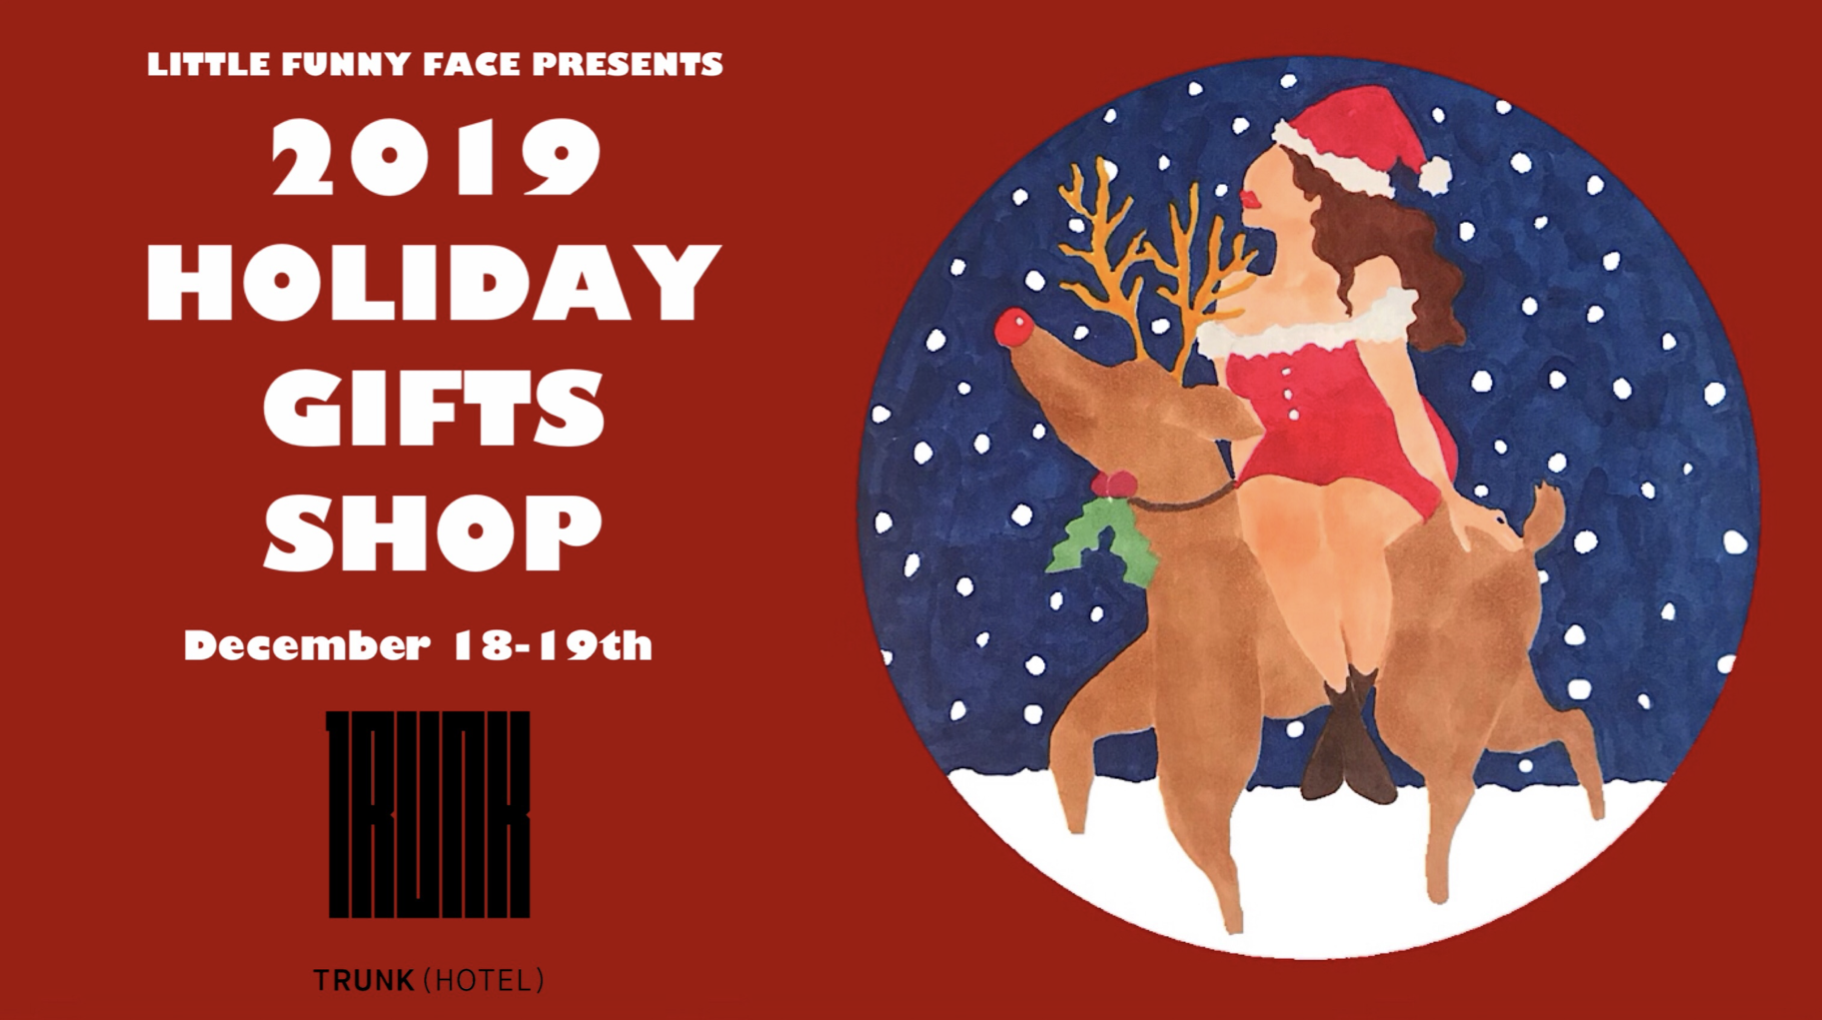 LITTLE FUNNY FACE "2019 HOLIDAY GIFTS SHOP"